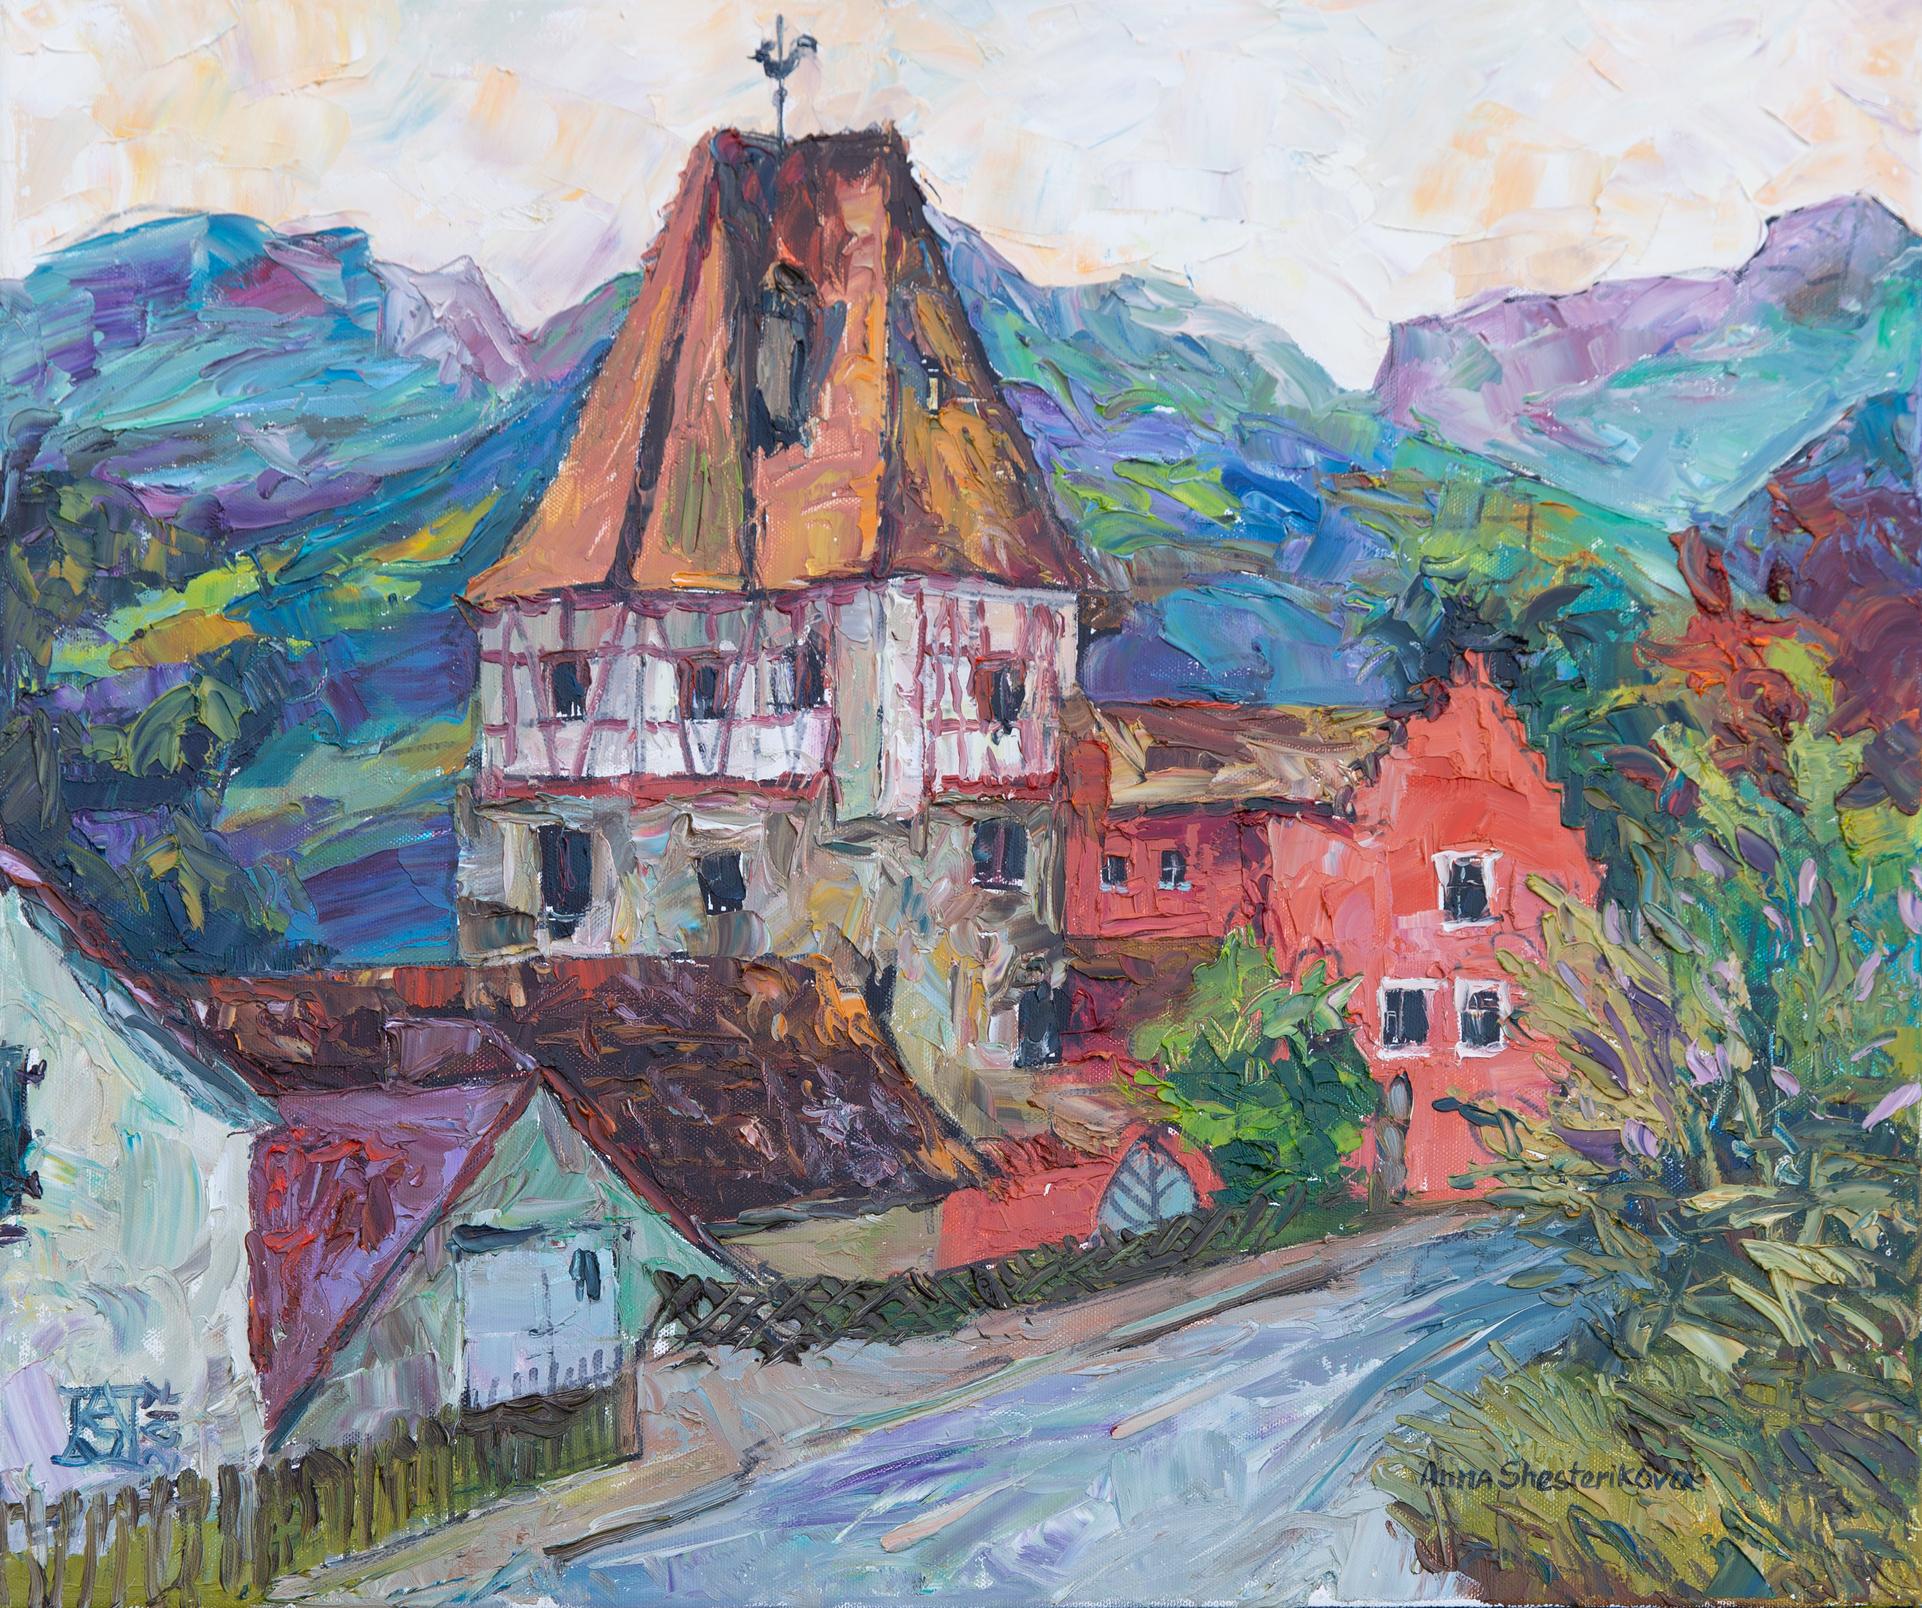 Anna Shesterikova Landscape Painting - Red House in Vaduz